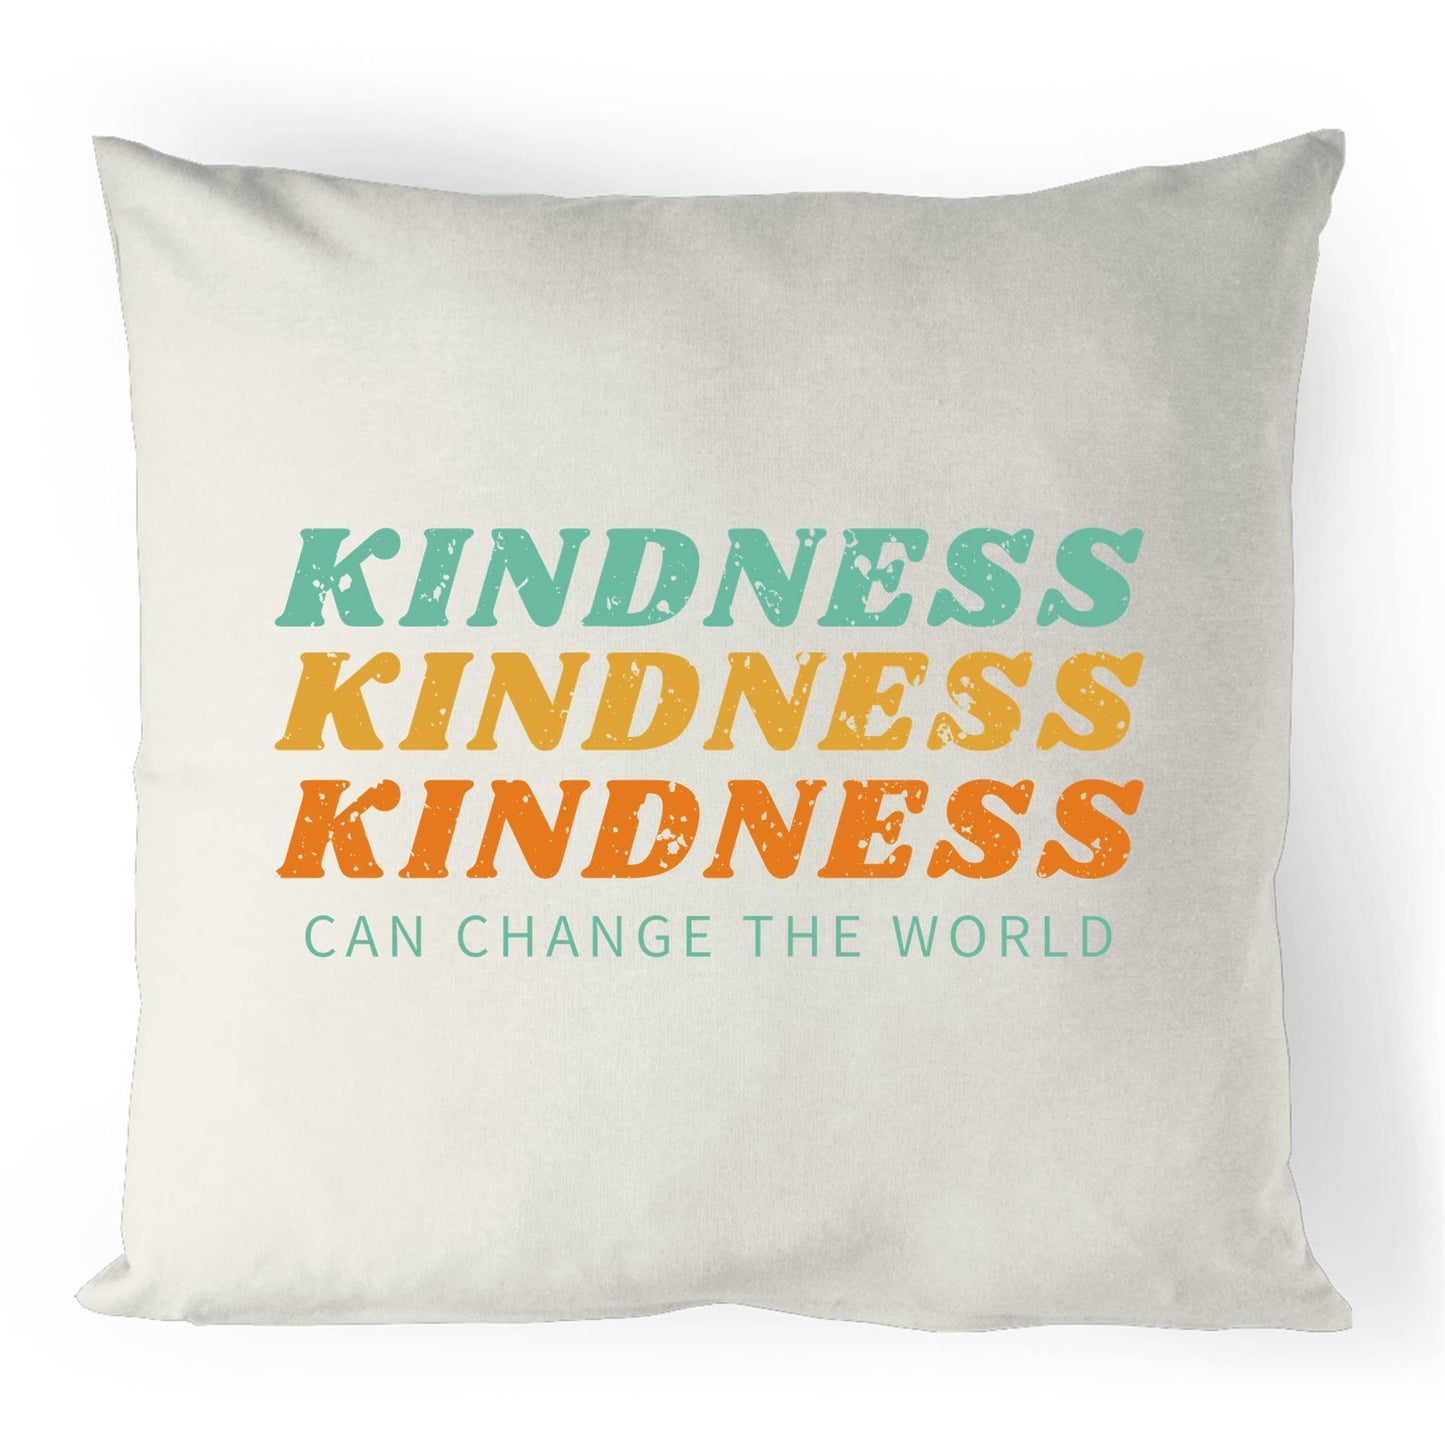 Kindness - 100% Linen Cushion Cover Natural One-Size Linen Cushion Cover Retro